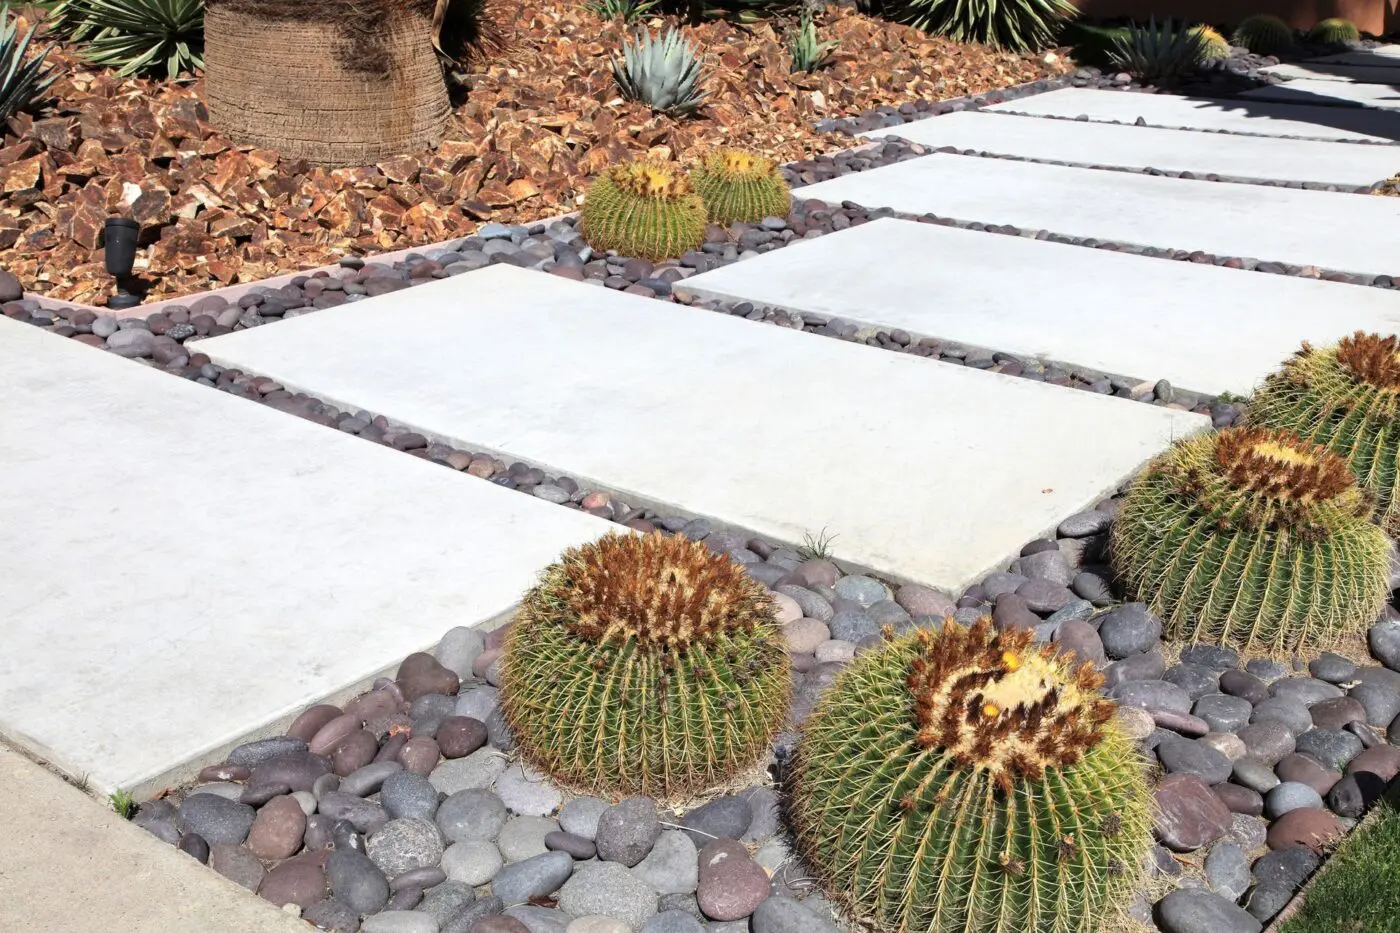 A pathway made of large rectangular concrete slabs is surrounded by small smooth stones and large spherical cacti, exemplifying expert desert landscaping. In the background, the ground is covered with dry brown leaves and various desert plants, including agave and palm trees.